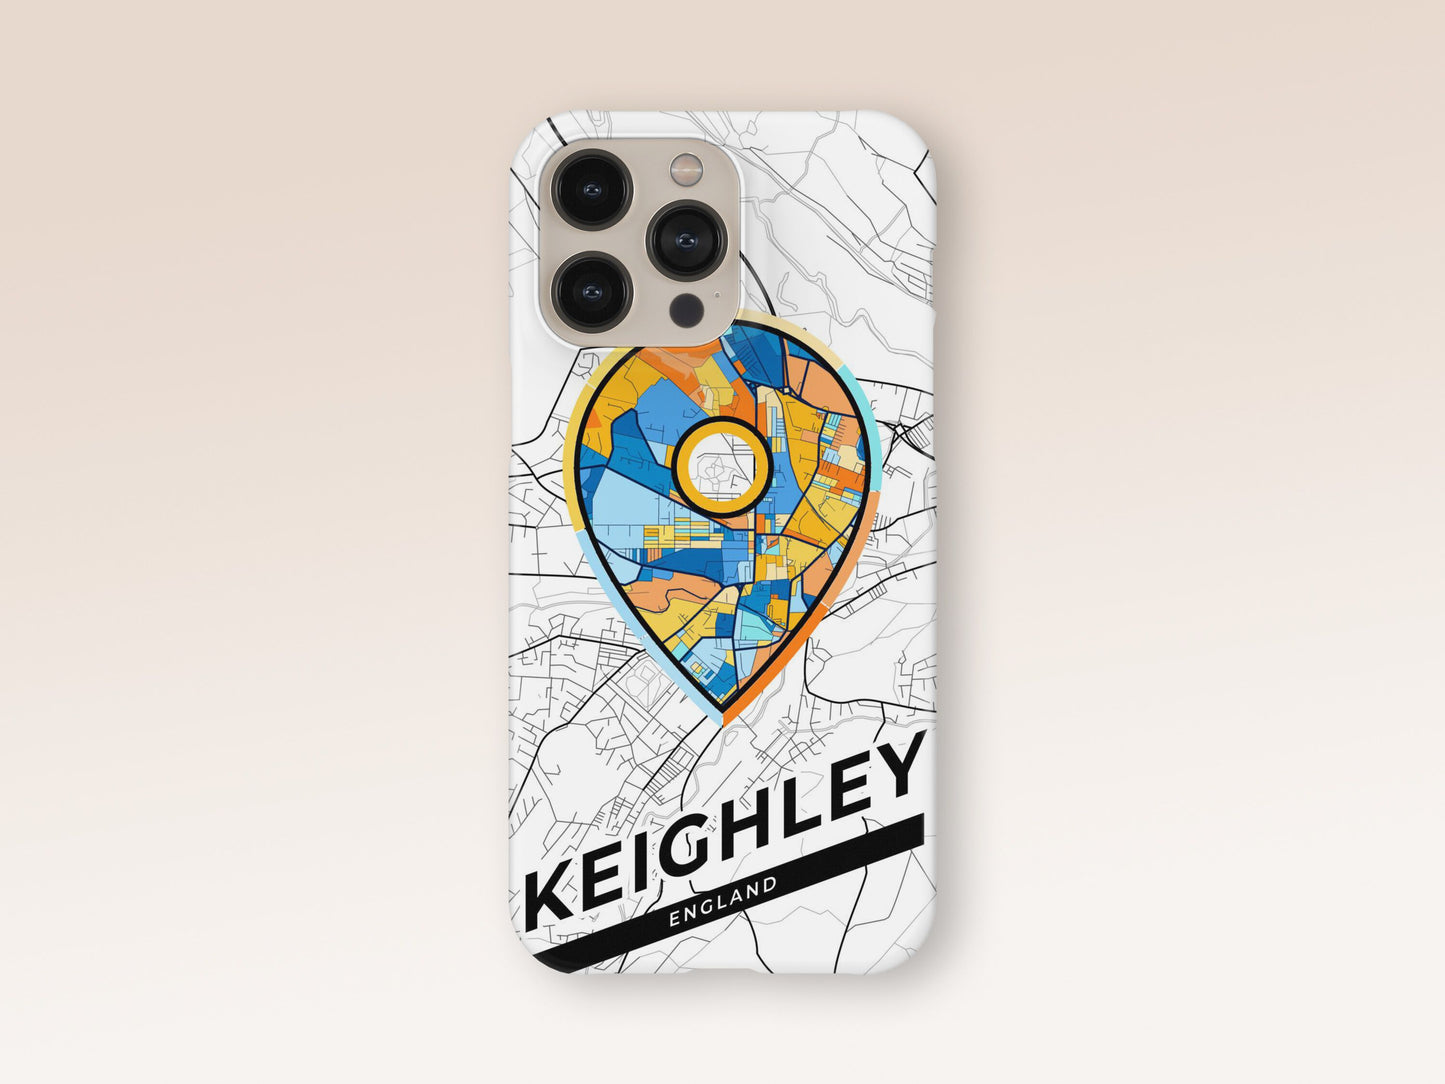 Keighley England slim phone case with colorful icon. Birthday, wedding or housewarming gift. Couple match cases. 1